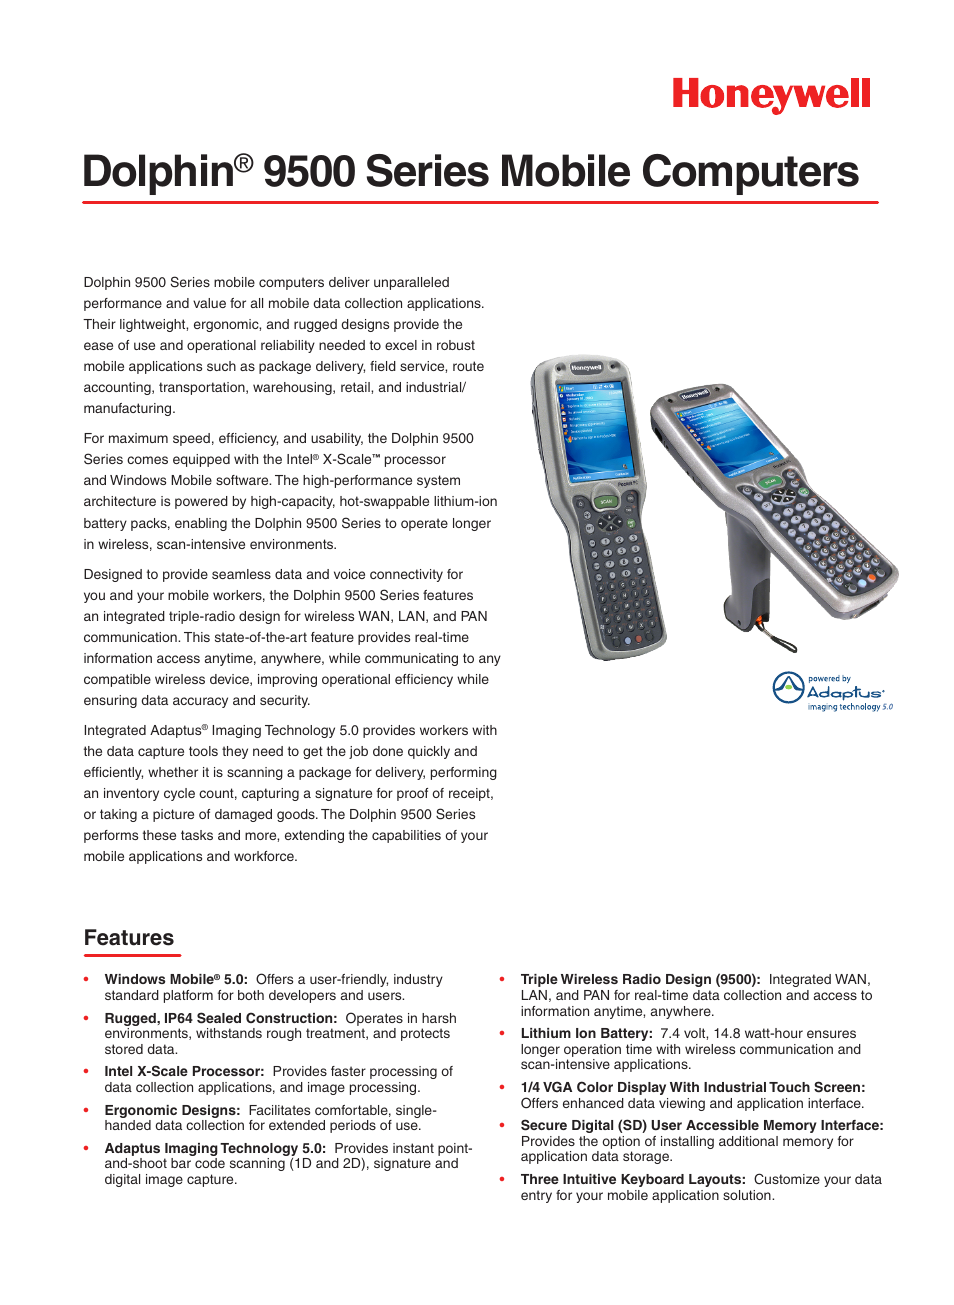 Honeywell Dolphin 9500 Series User Manual | 2 pages